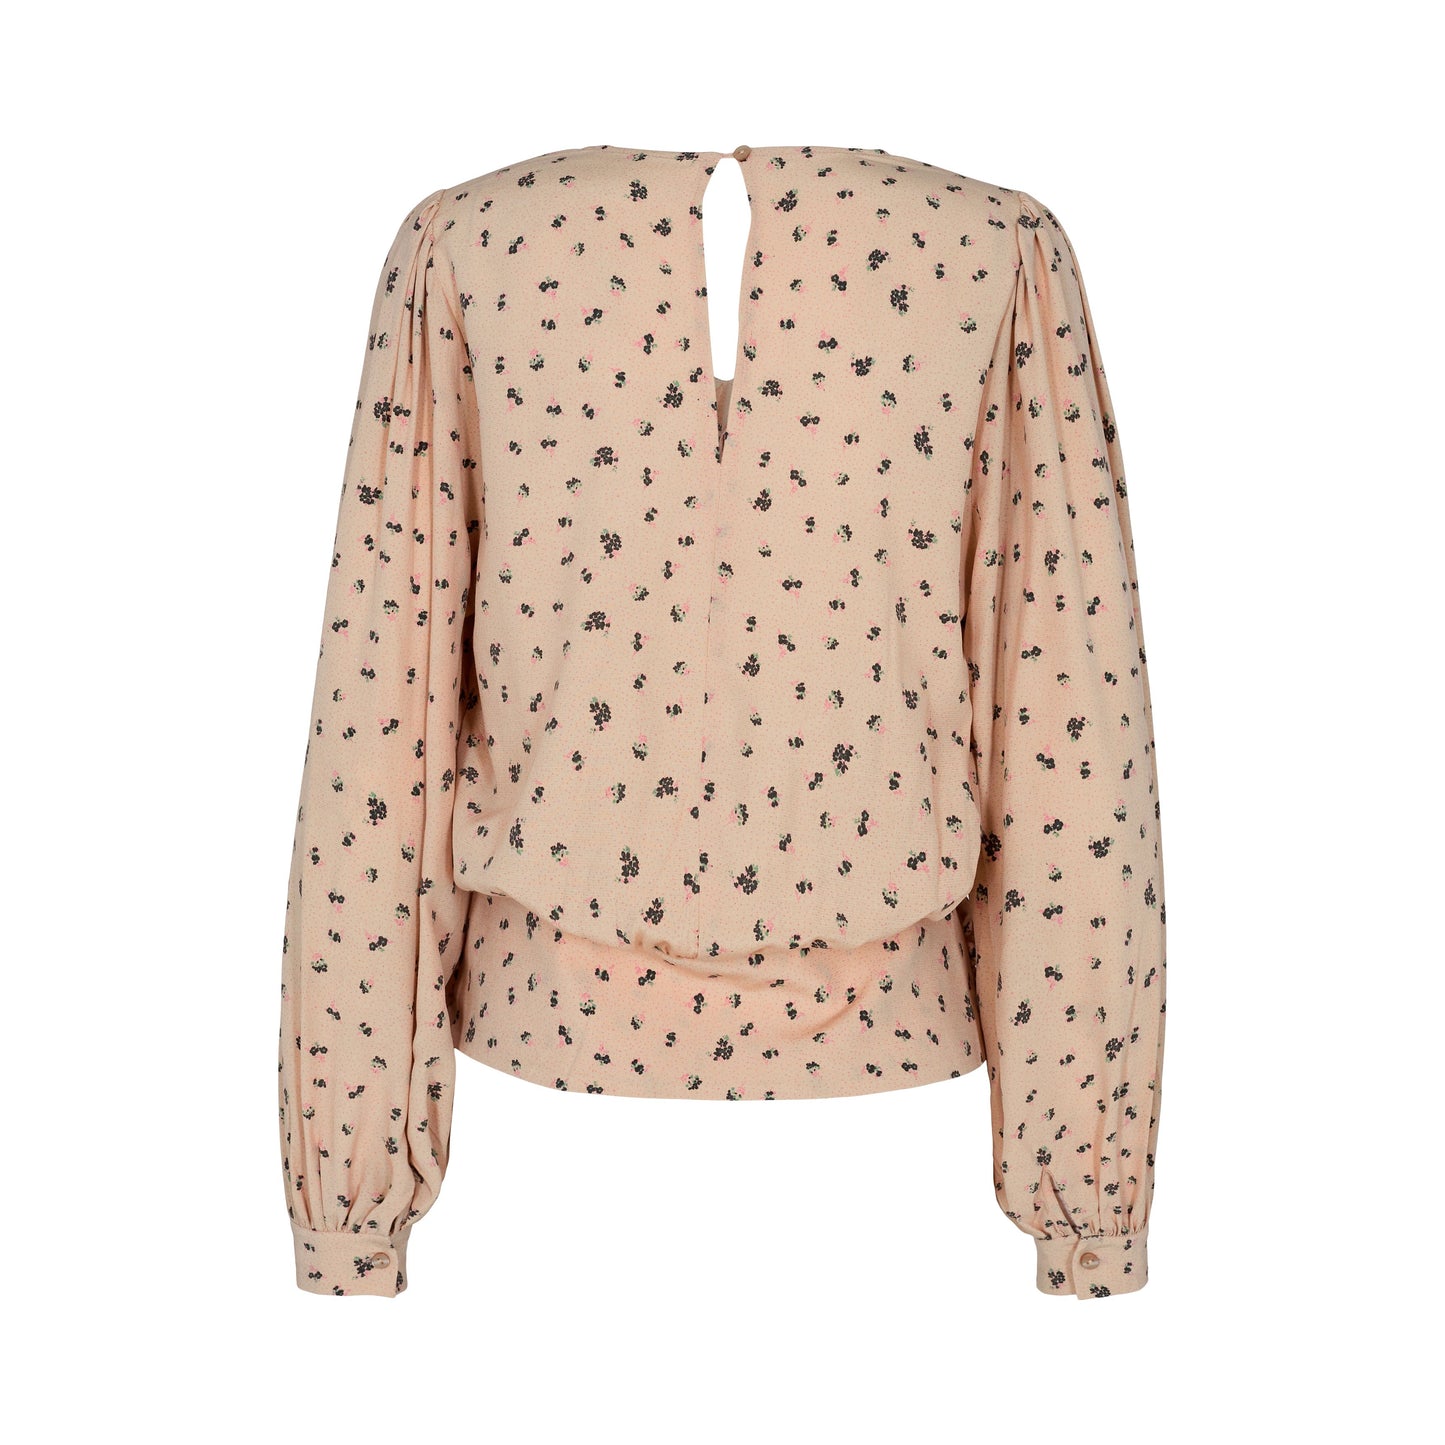 Sofie Schnoor ruched blouse - ditsy print